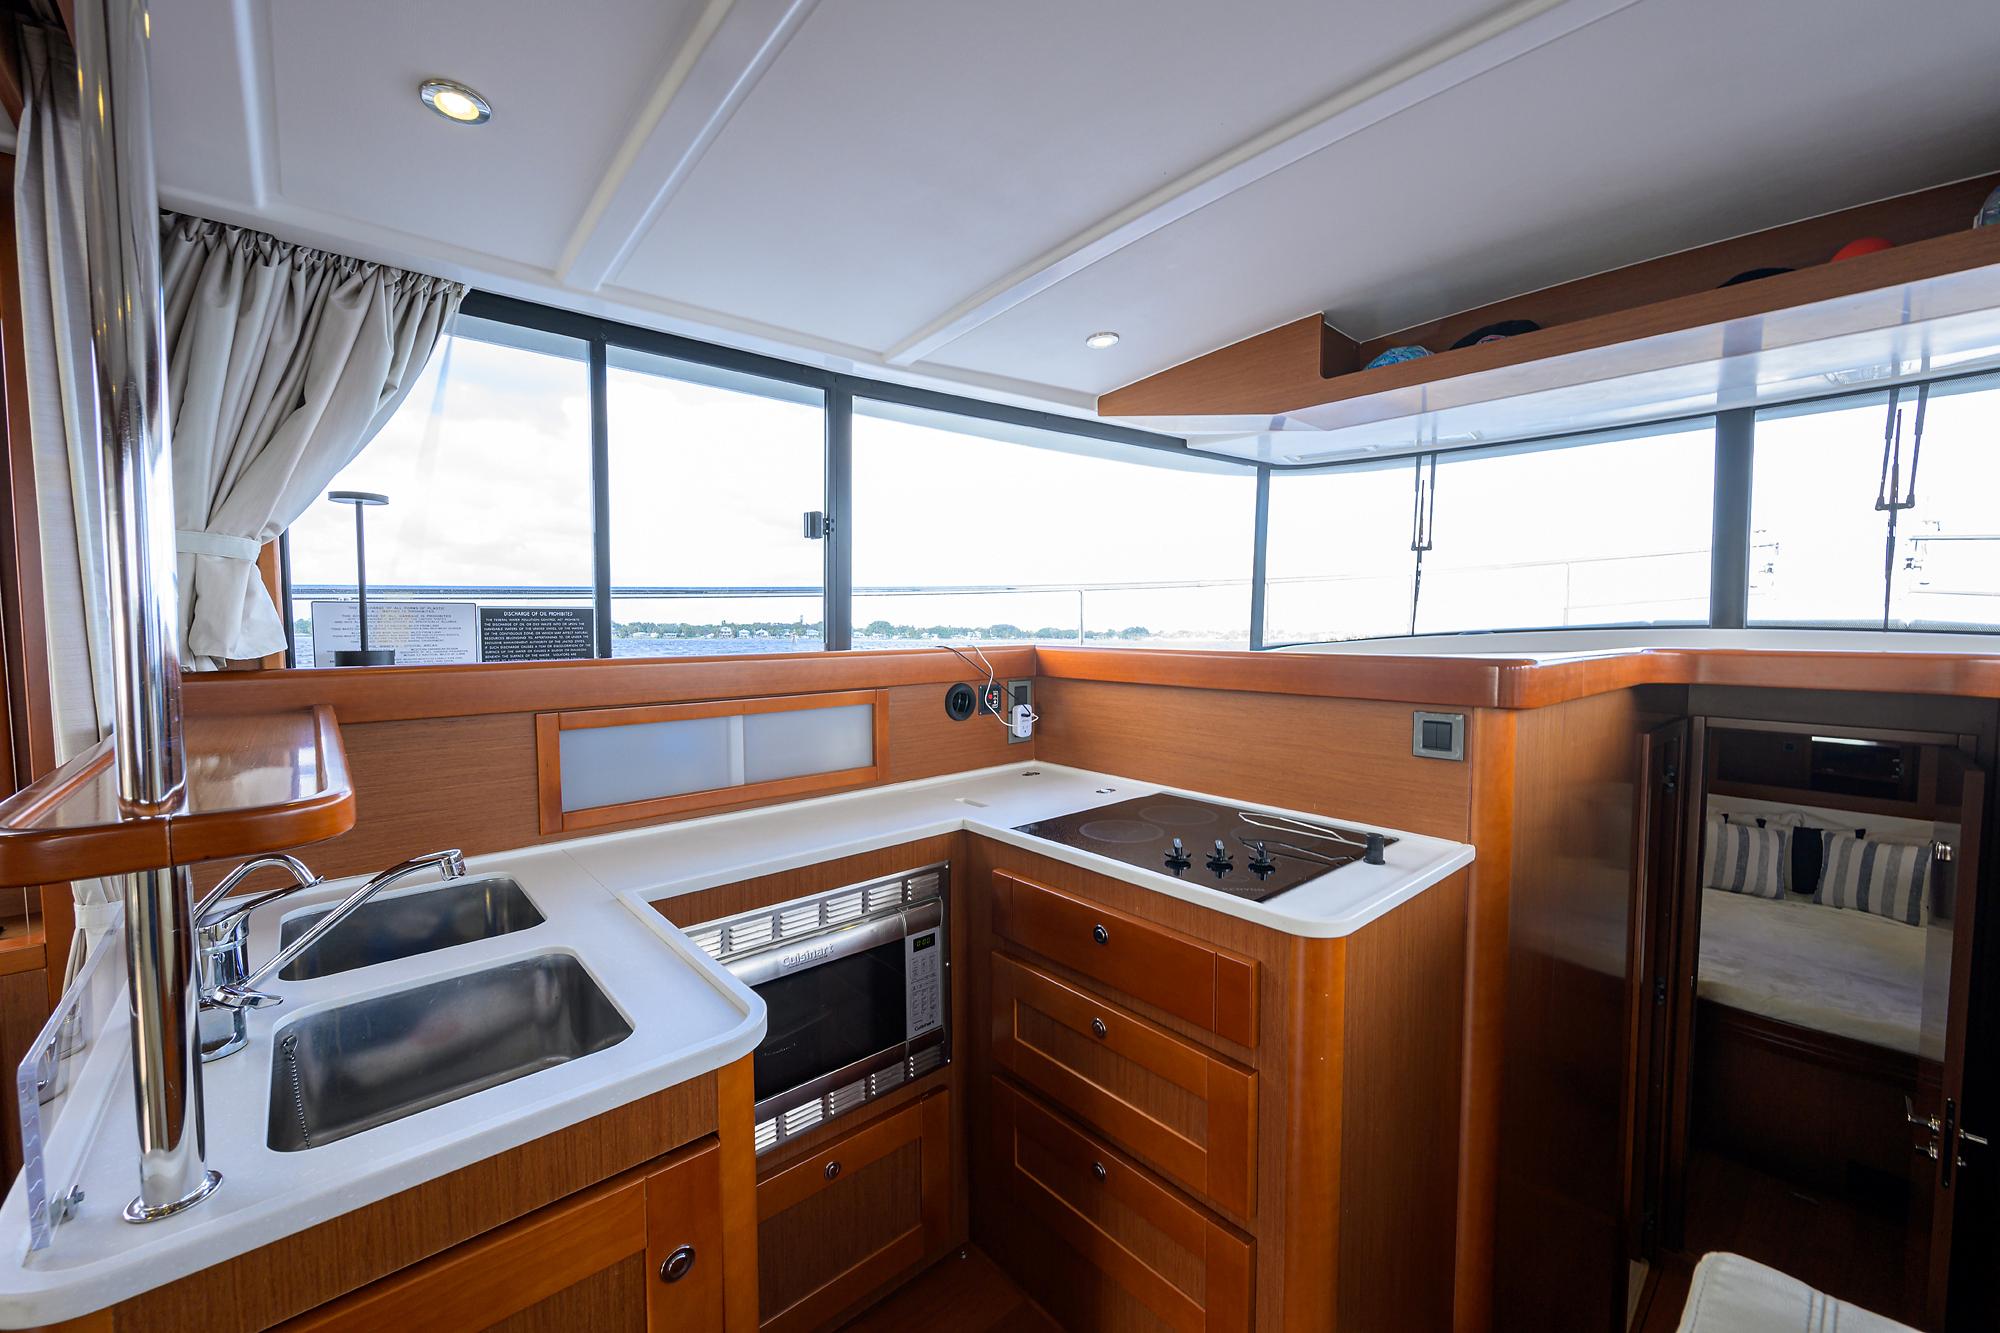 Beneteau 44 Southern Trawl - Galley, Sink and Cooktop